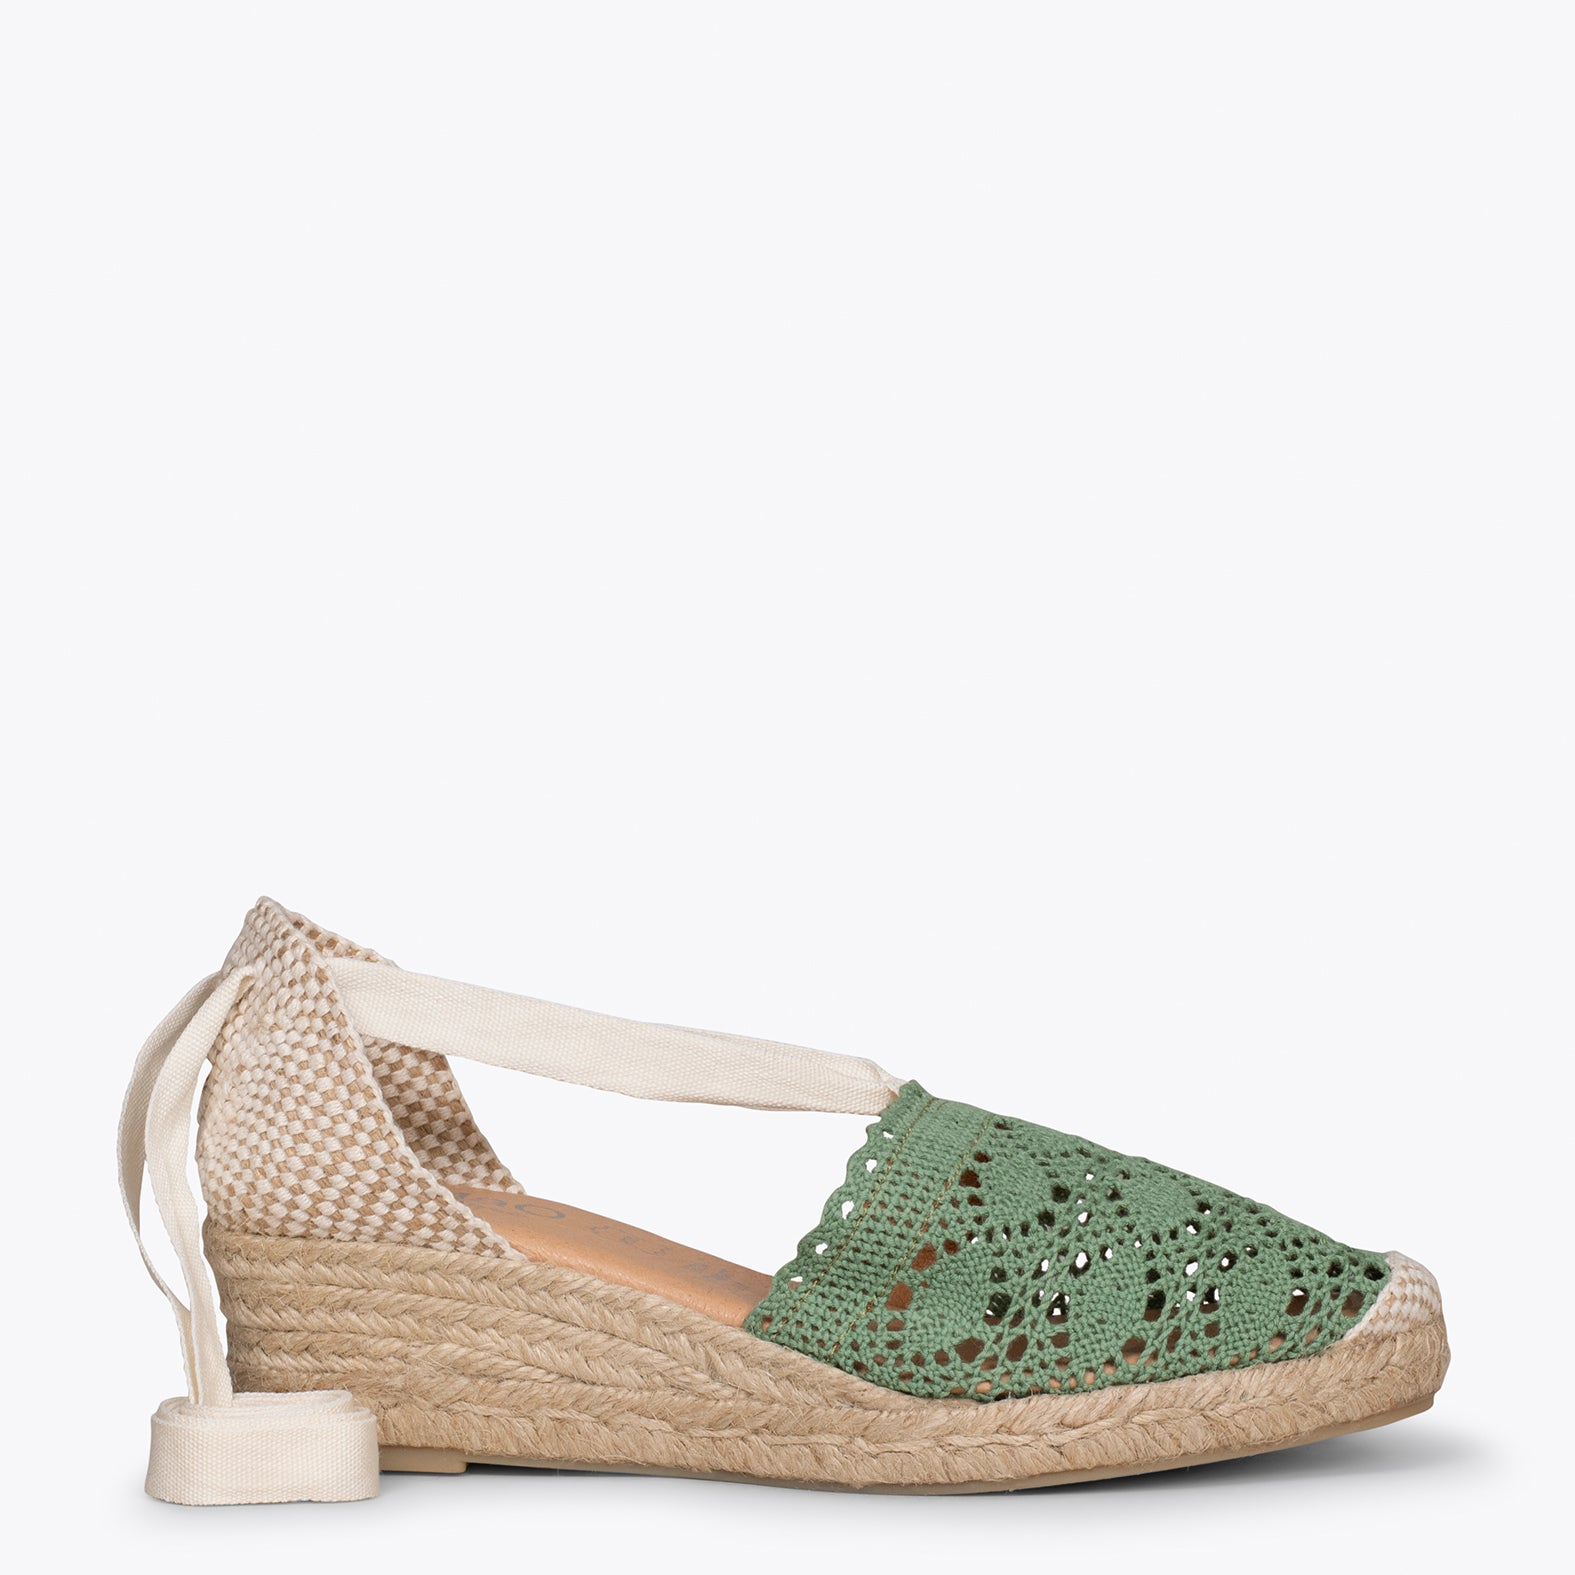 DEIÀ – GREEN crocheted espadrilles with laces